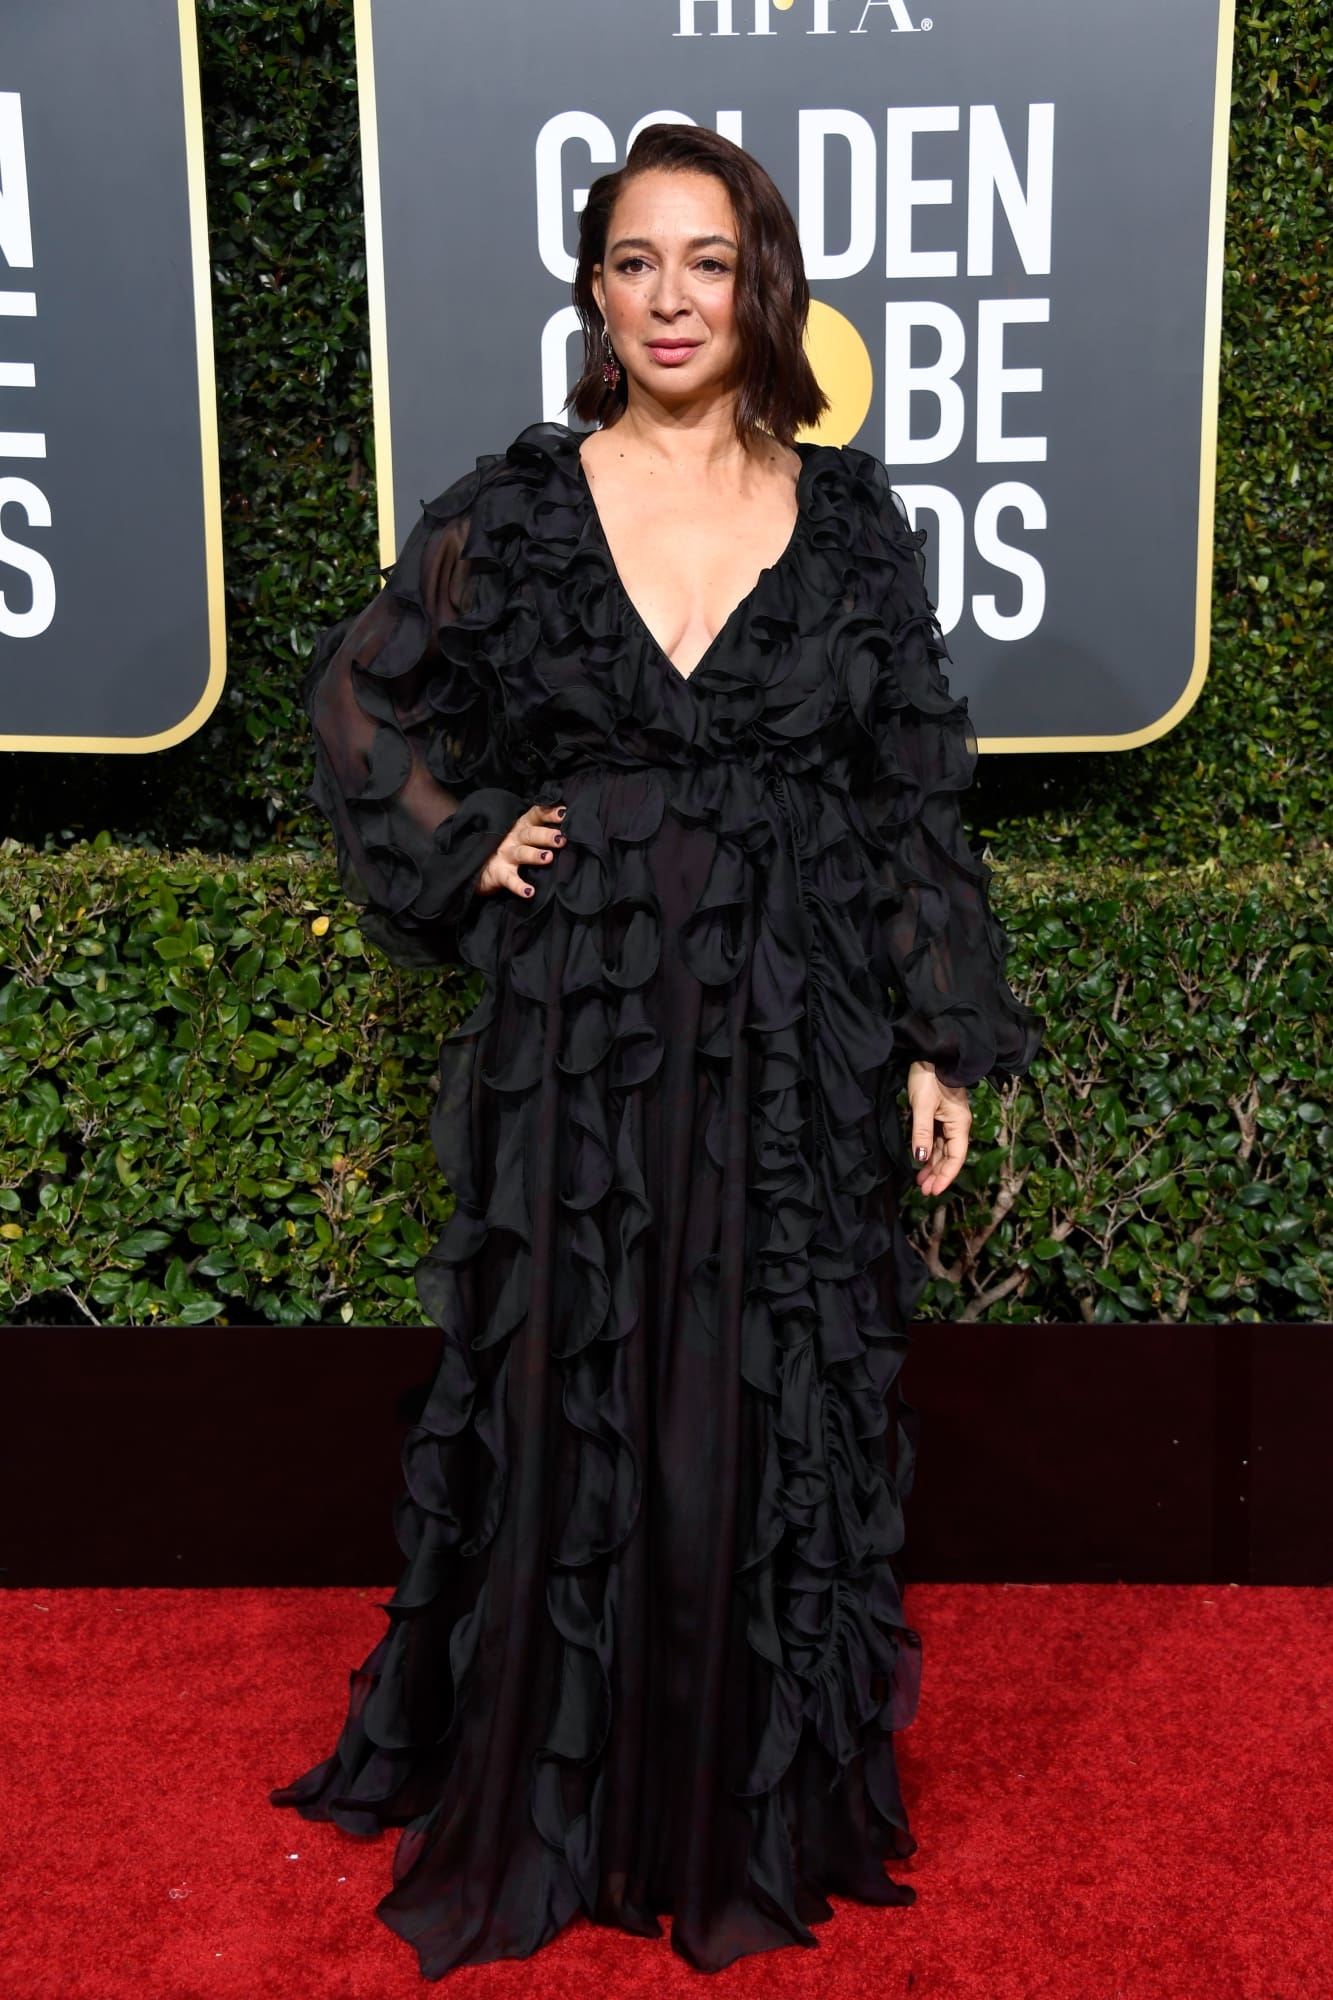 Every Look From The 2019 Golden Globes Awards